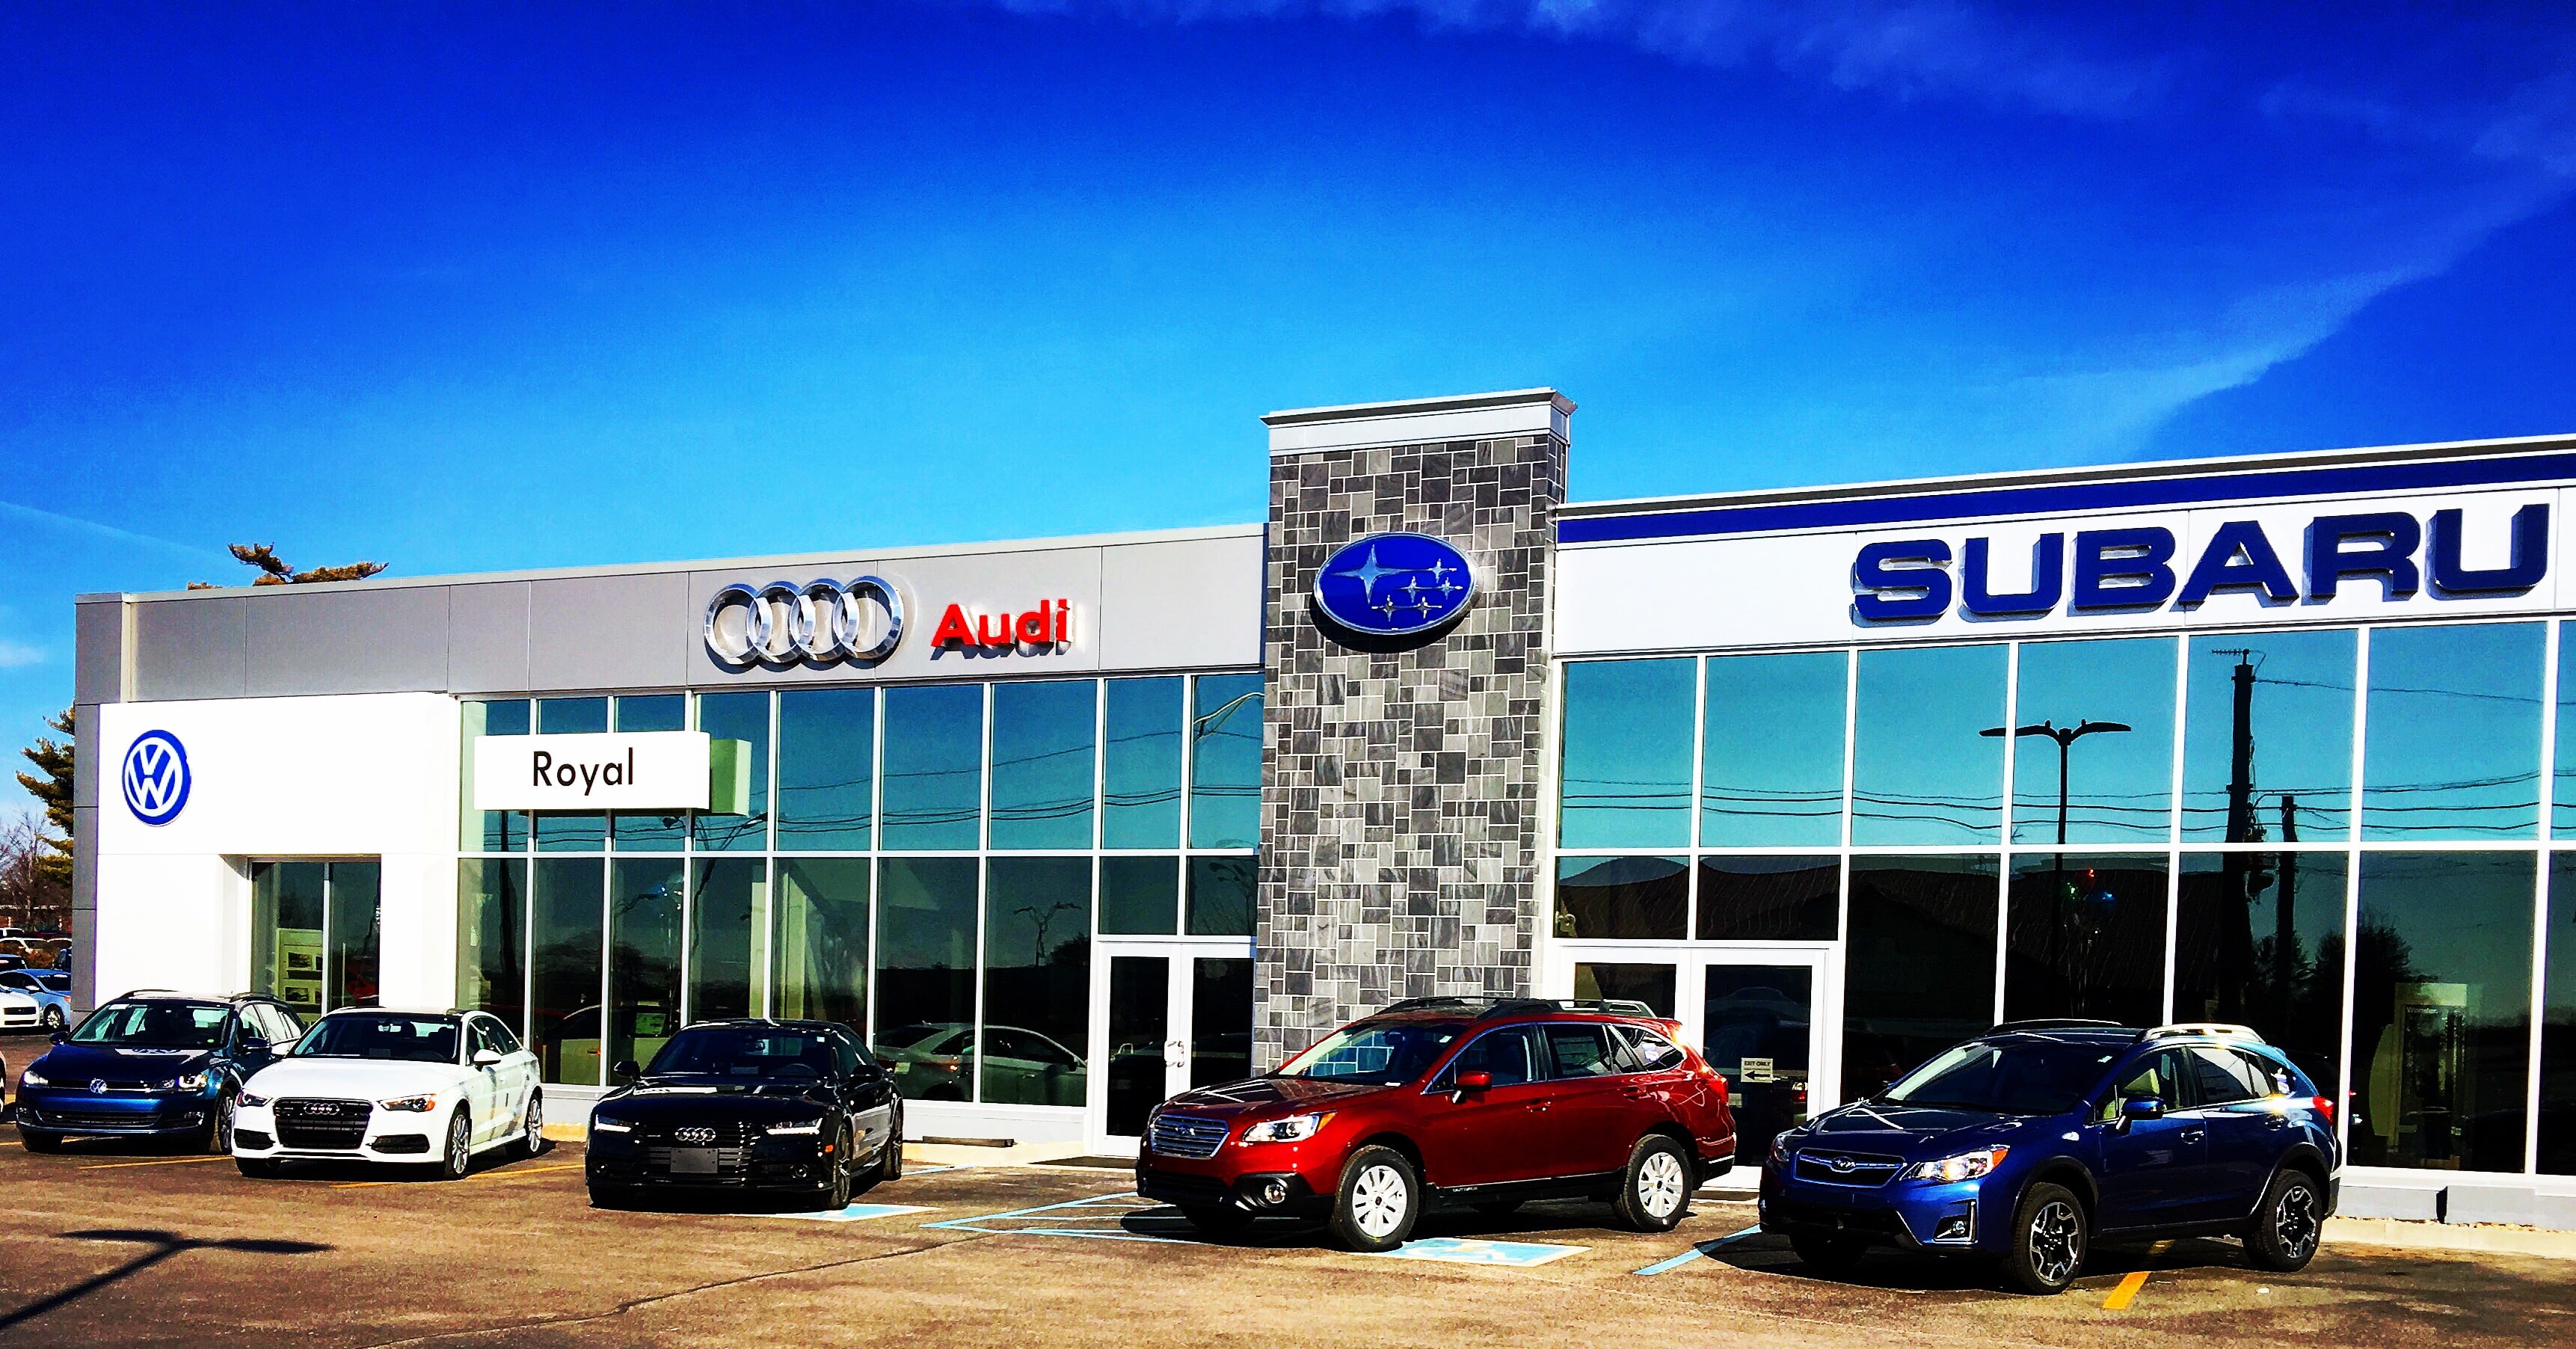 Vw Audi Dealer Near Me / Vw And Audi Dealers Confident Of Victory After